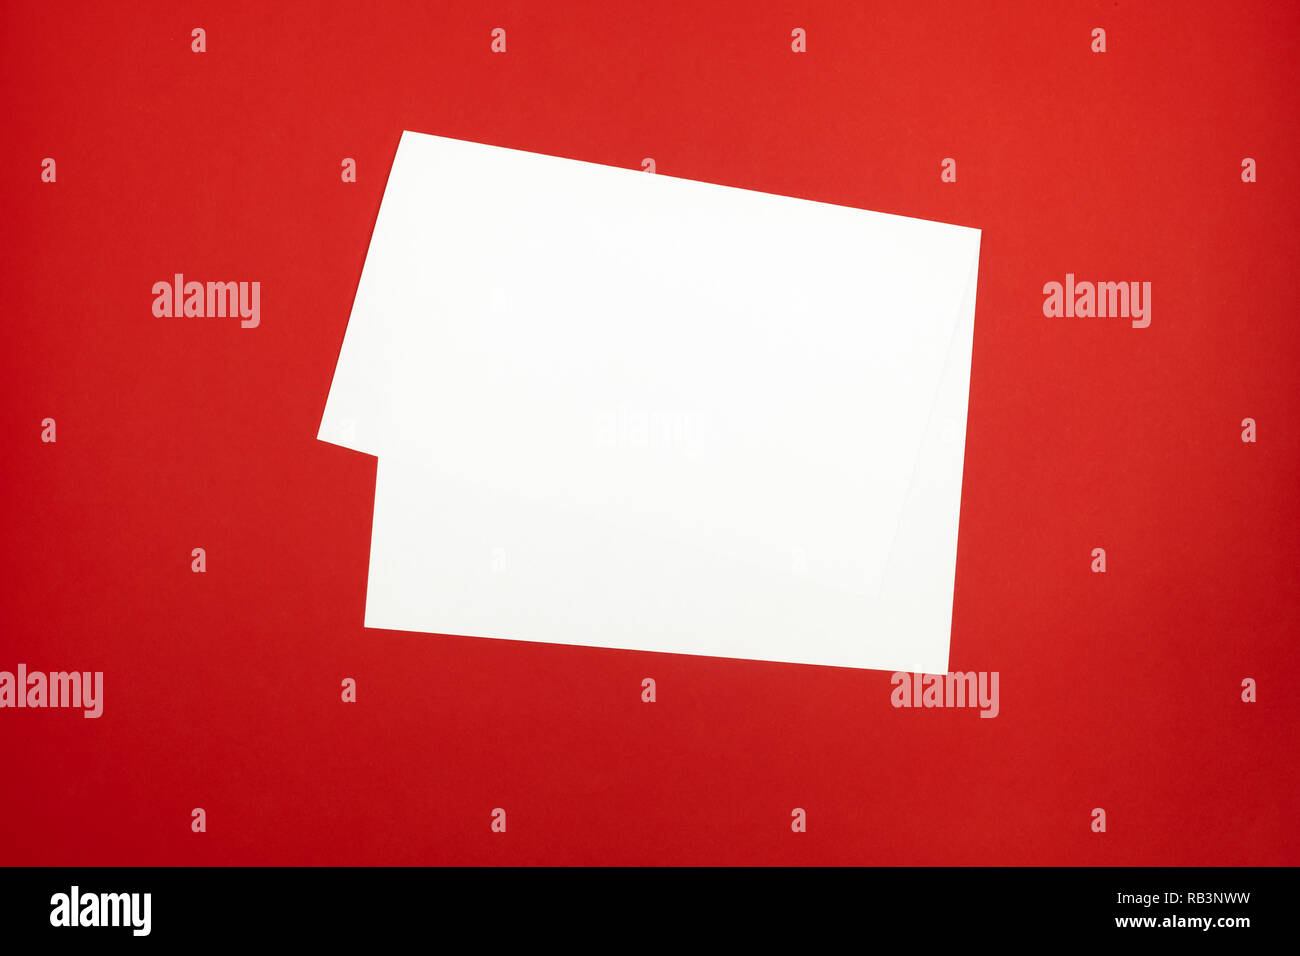 Blank paper sheet on bright red background. Top view of bent white paper laying on vivid colored table top Stock Photo